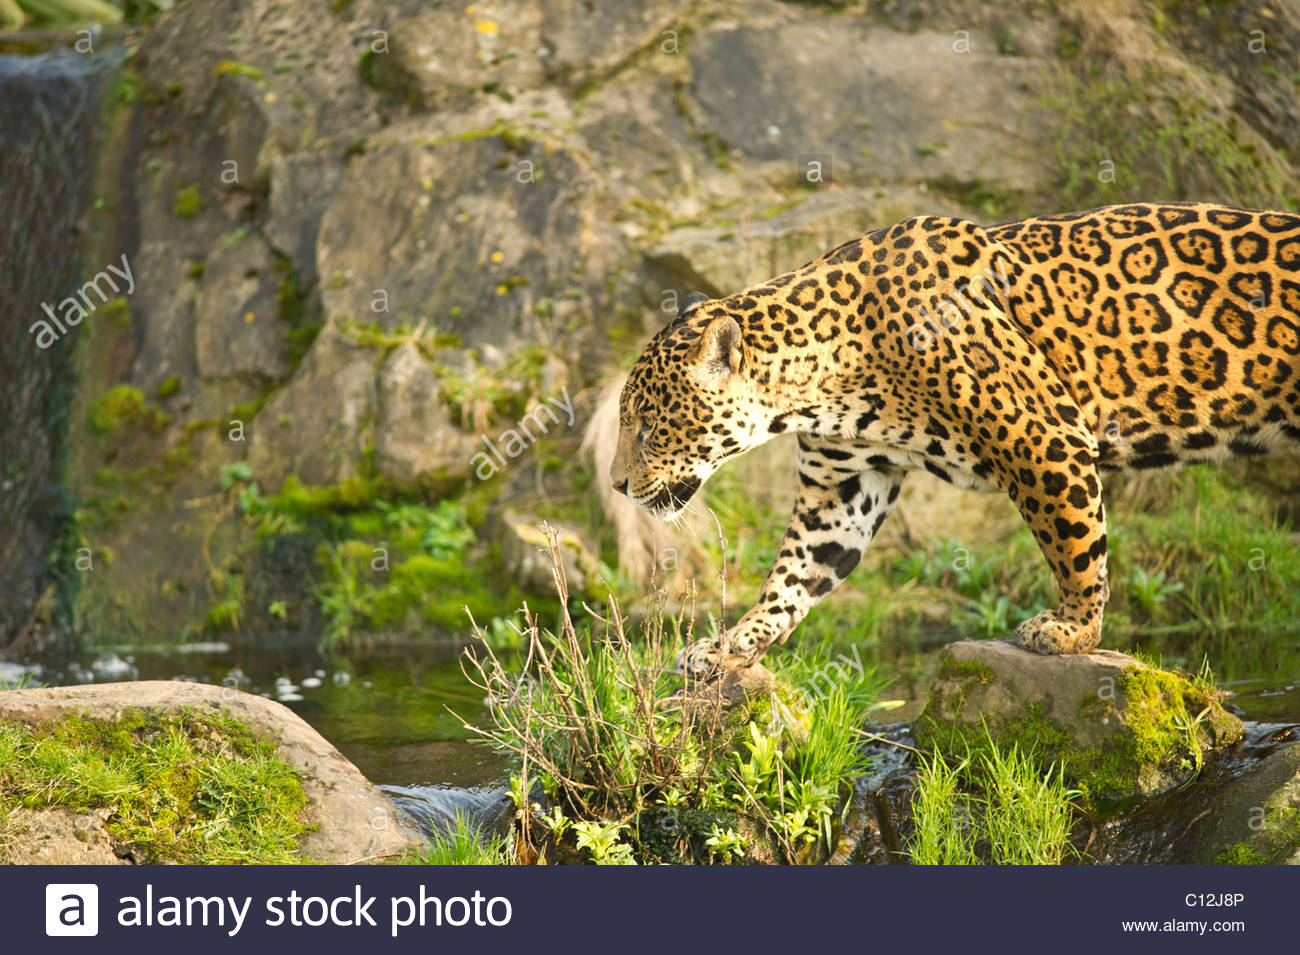 Jaguar Against Grass And Jungle Background In Controlled